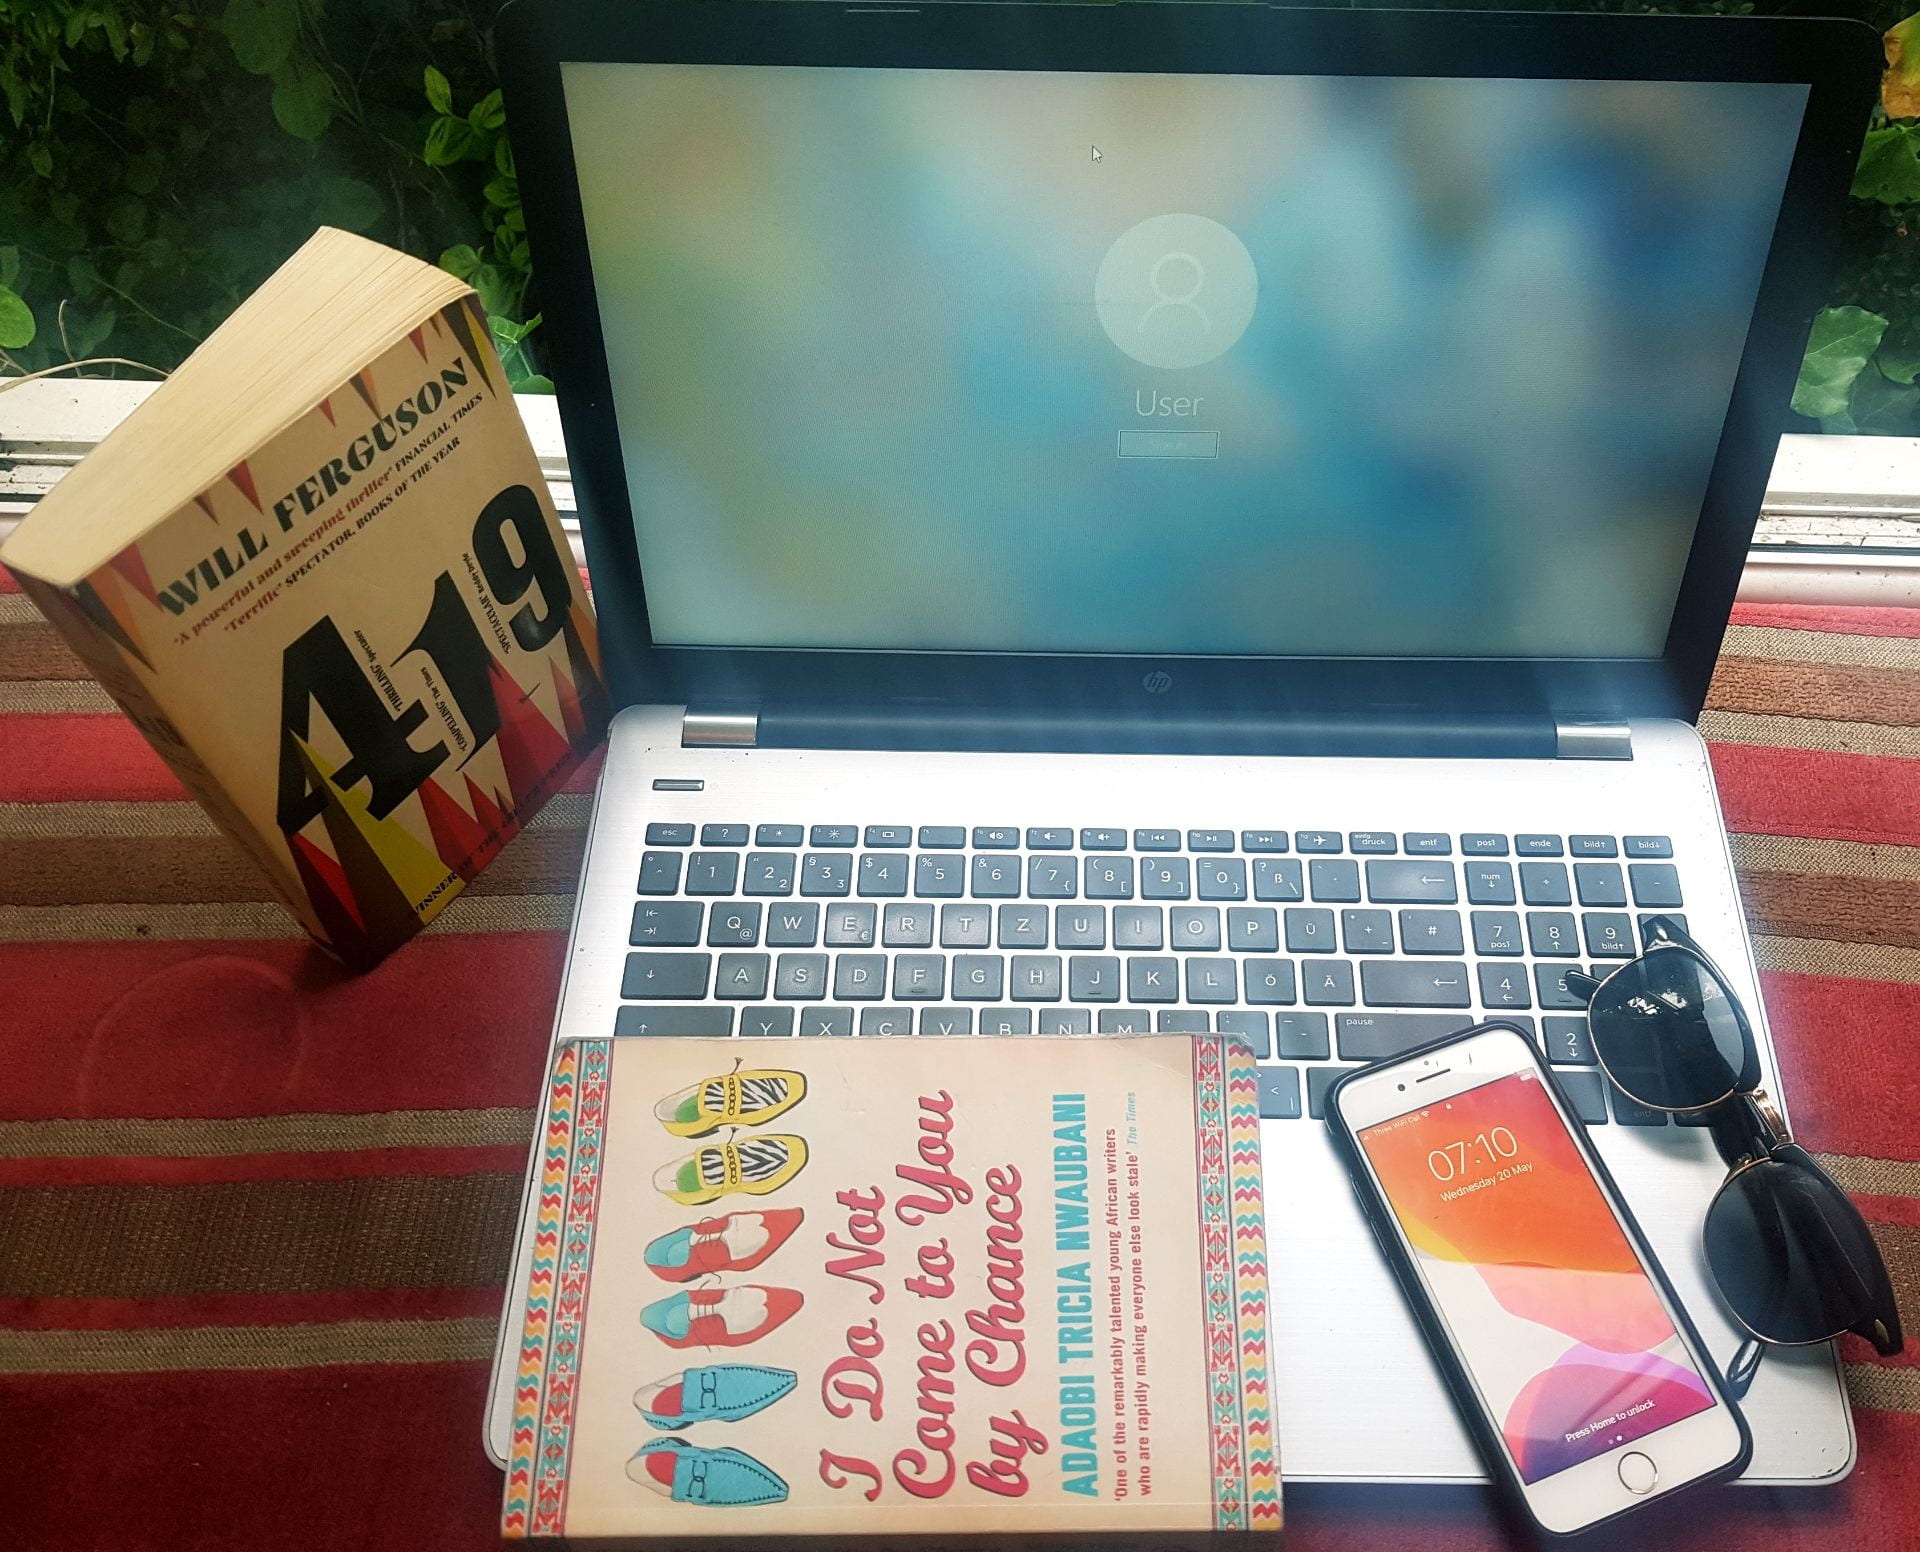 A MacBook laptop. On top of it is a novel ('I Do Not Come to You by Chance' by Adaobi Tricia Nwaubani), an iPhone and a pair of sunglasses.. To the left of the MacBook is another novel: '419' by Will Ferguson.